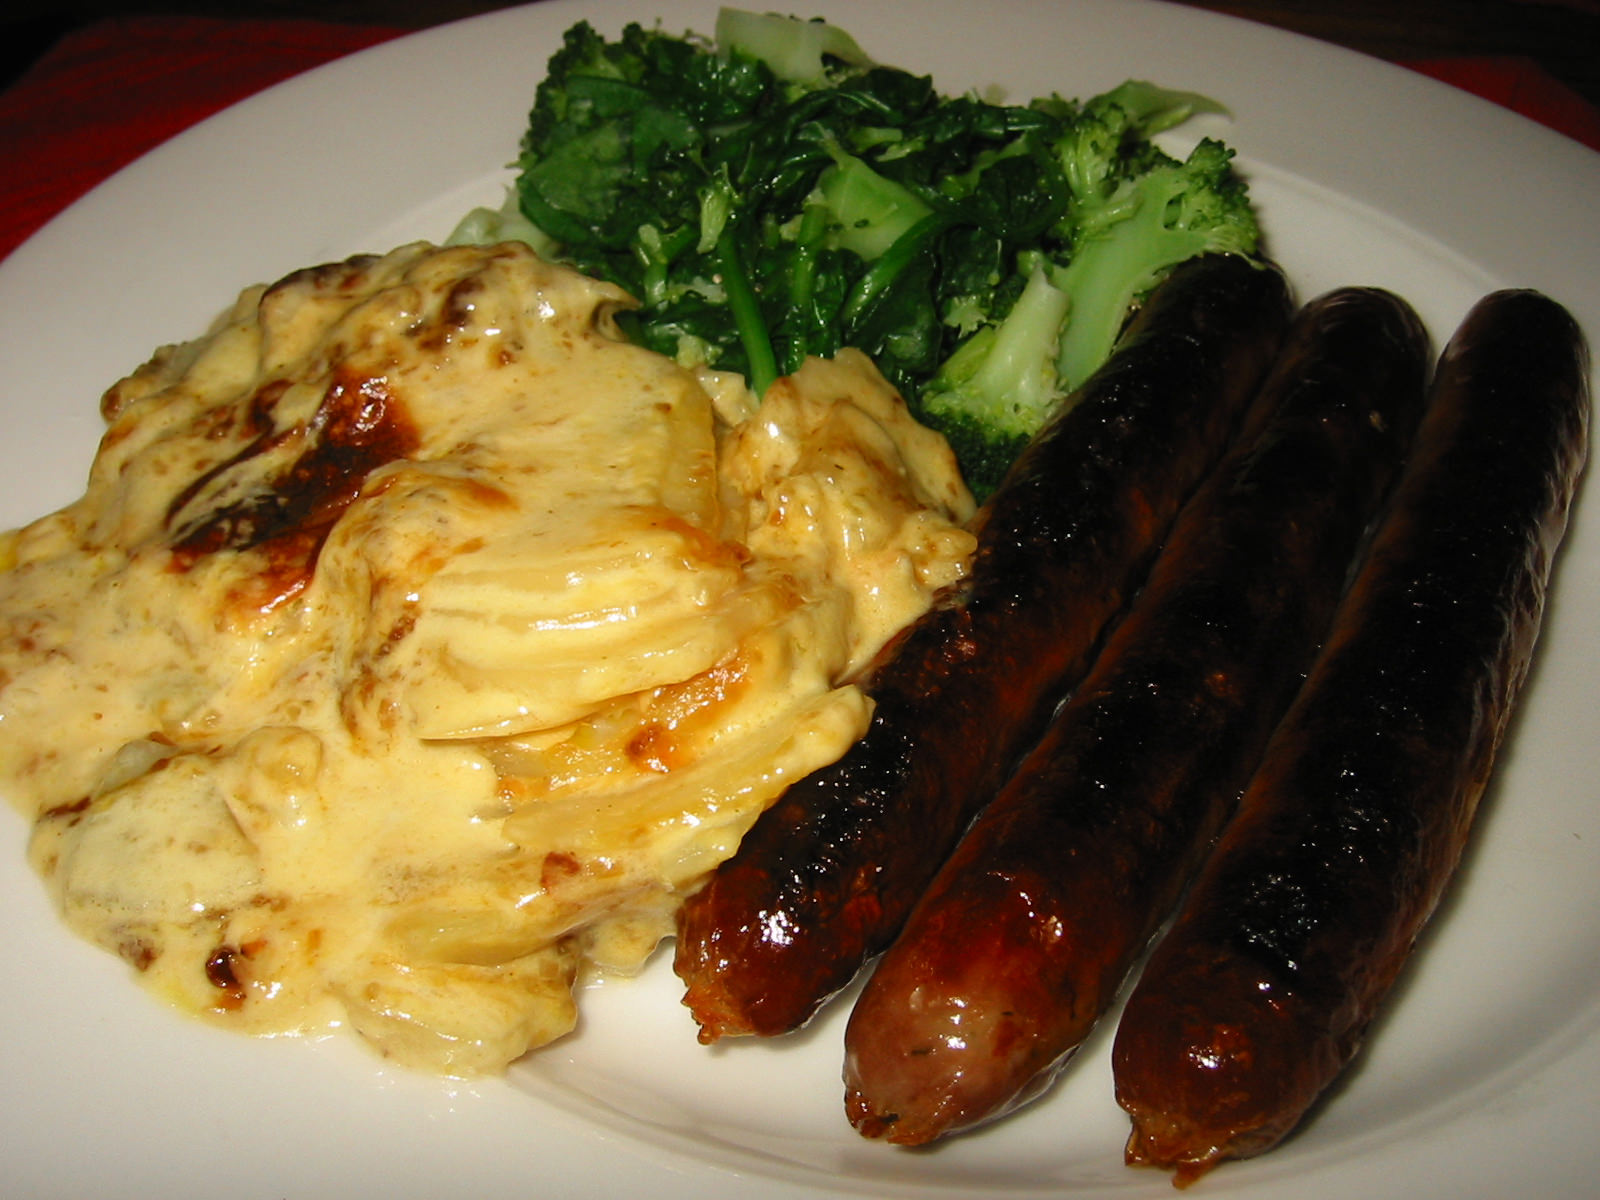 Sausages, potato bake and steamed broccoli and English spinach